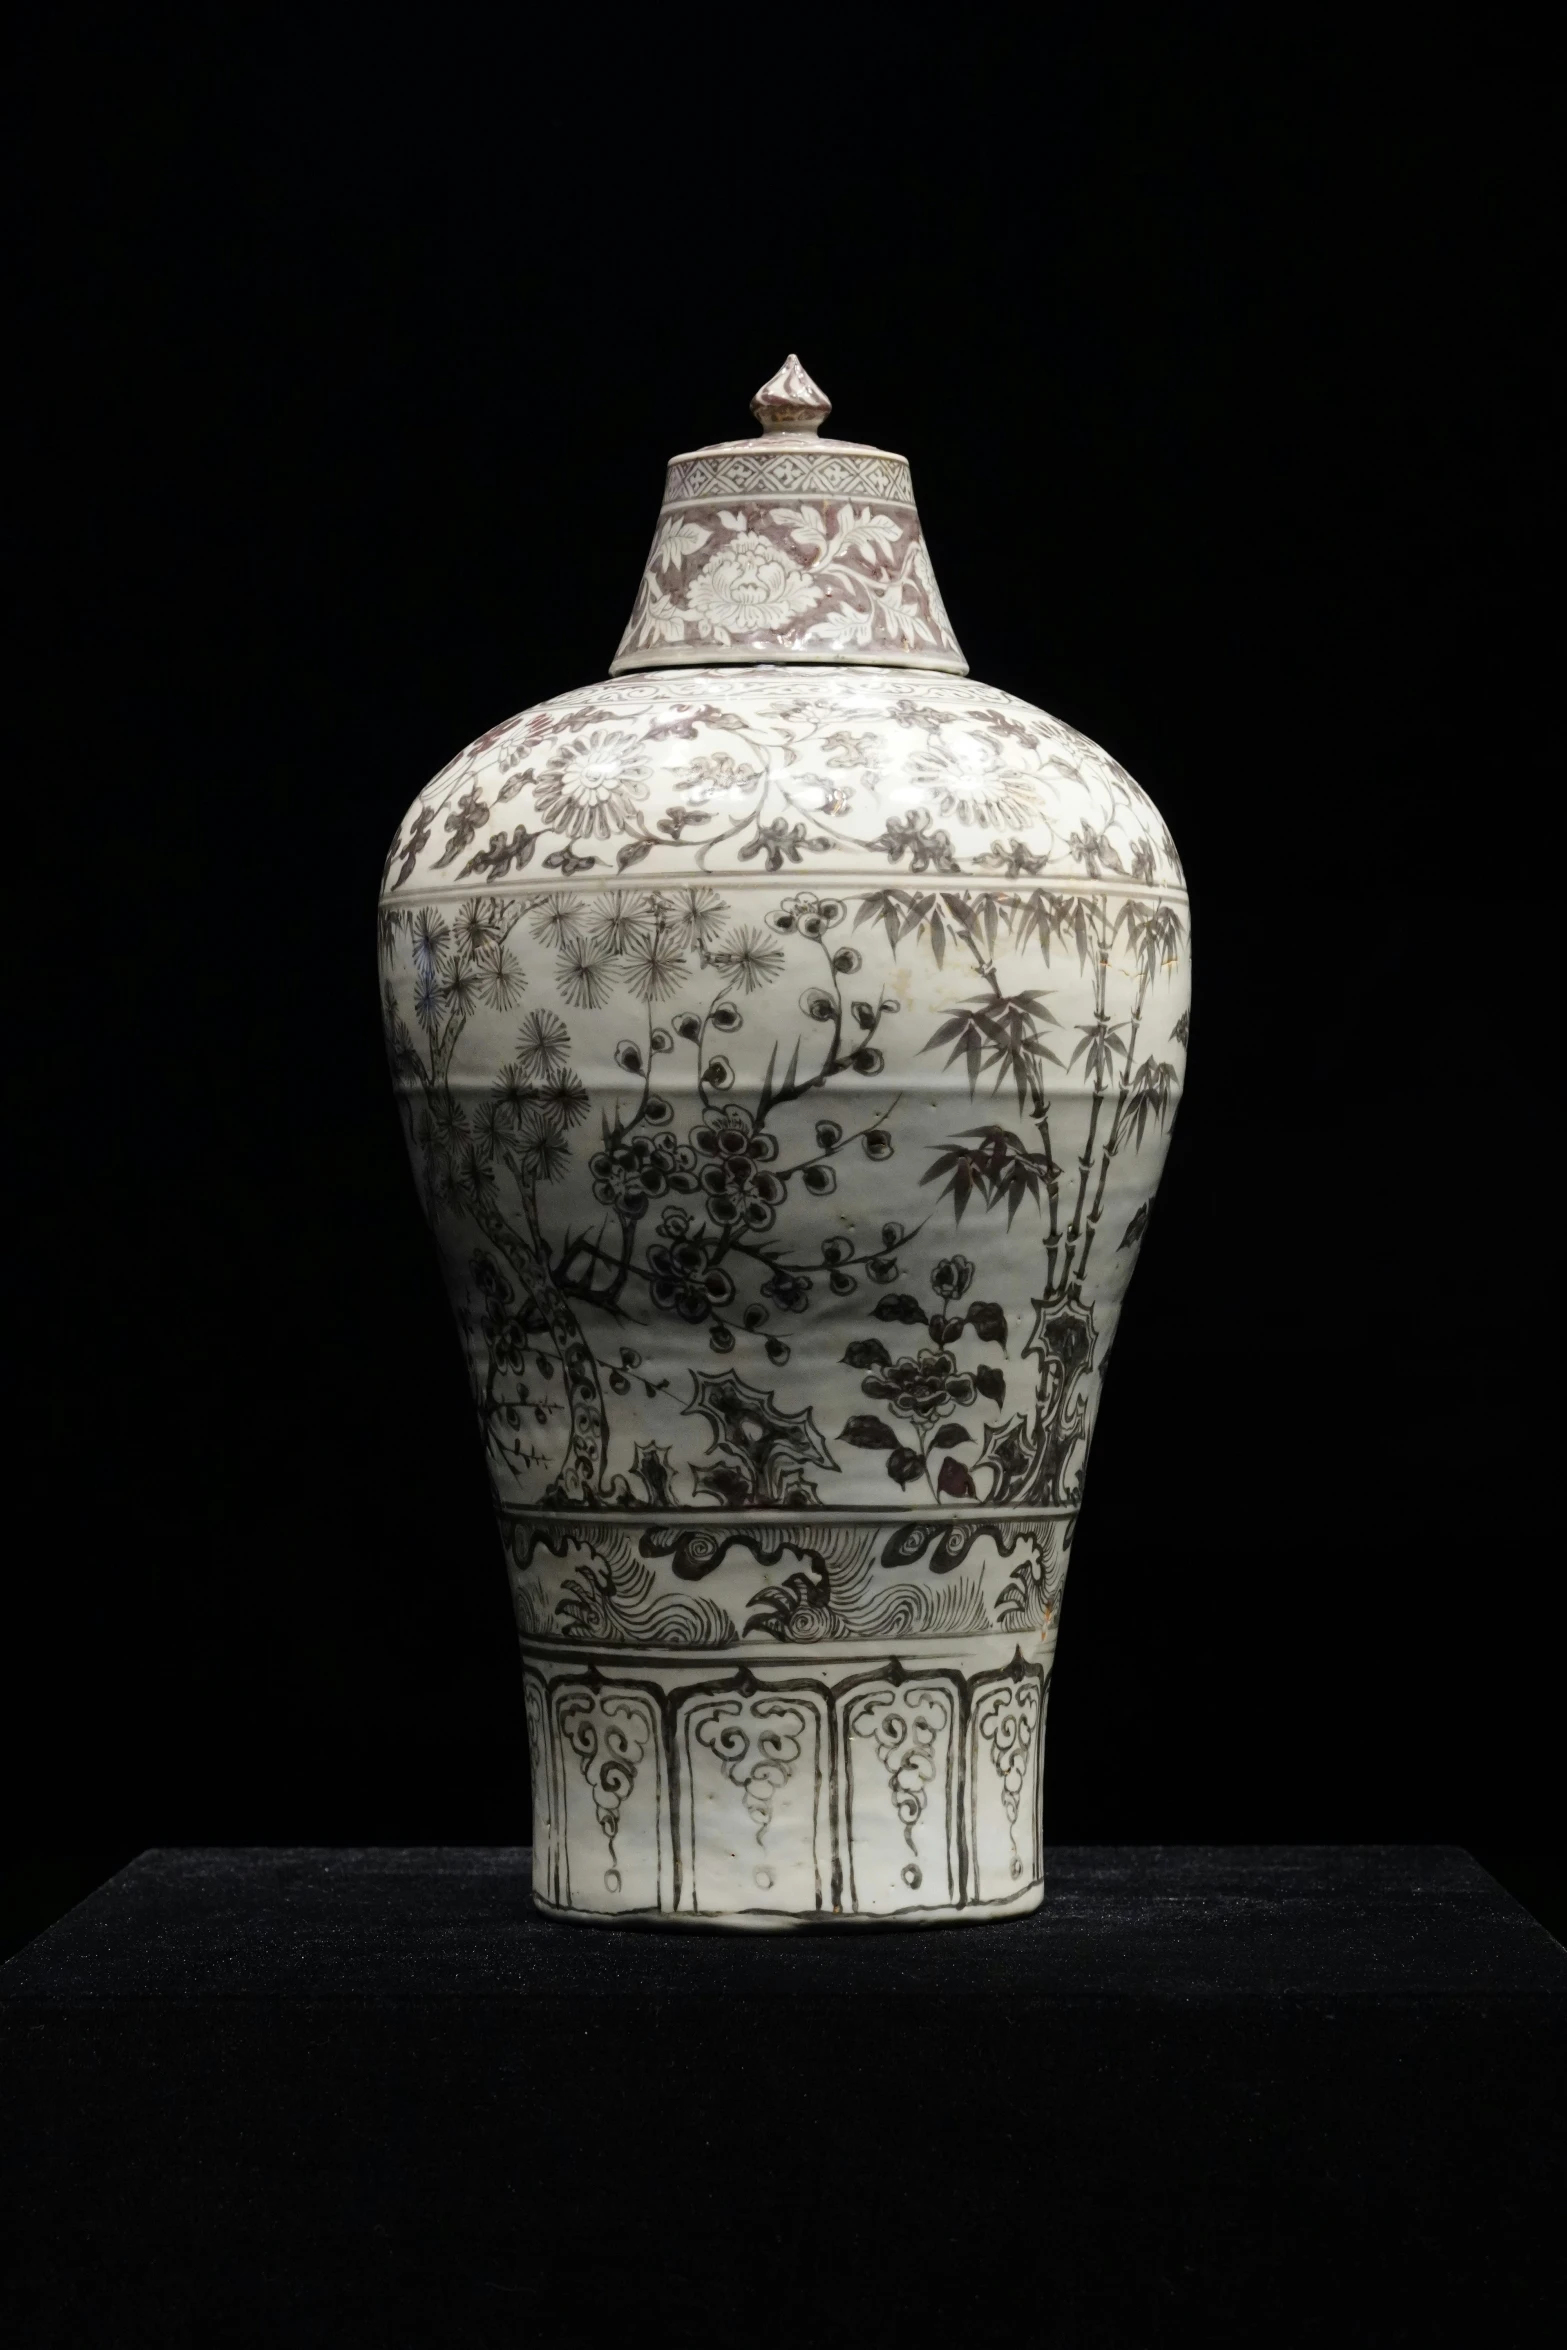 a large white vase with black design on it